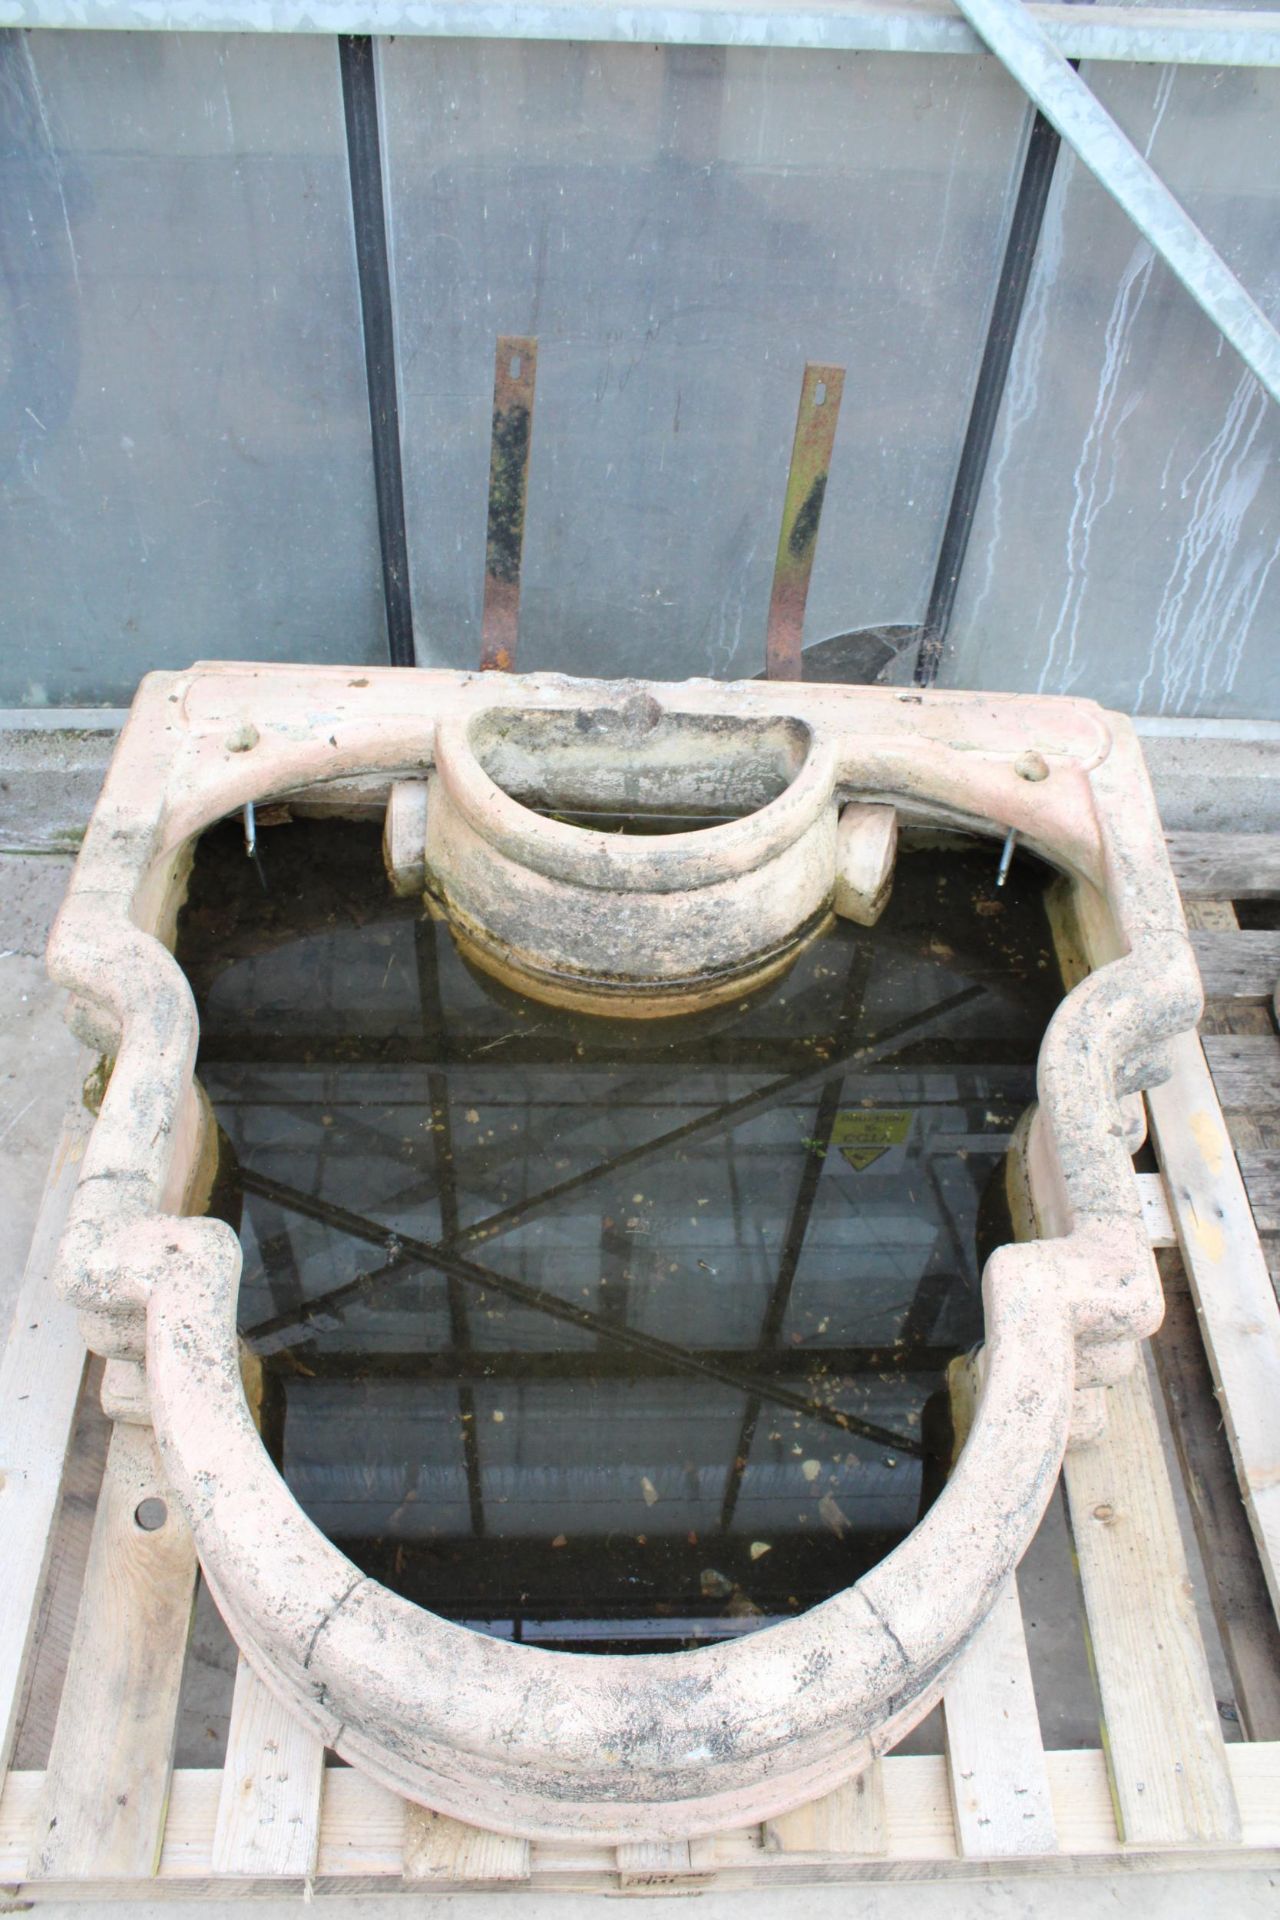 AN EXTREMELY LARGE AND HEAVY RECONSTITUTED STONE WATER FEATURE WITH LION HEAD DETAIL - Image 3 of 4